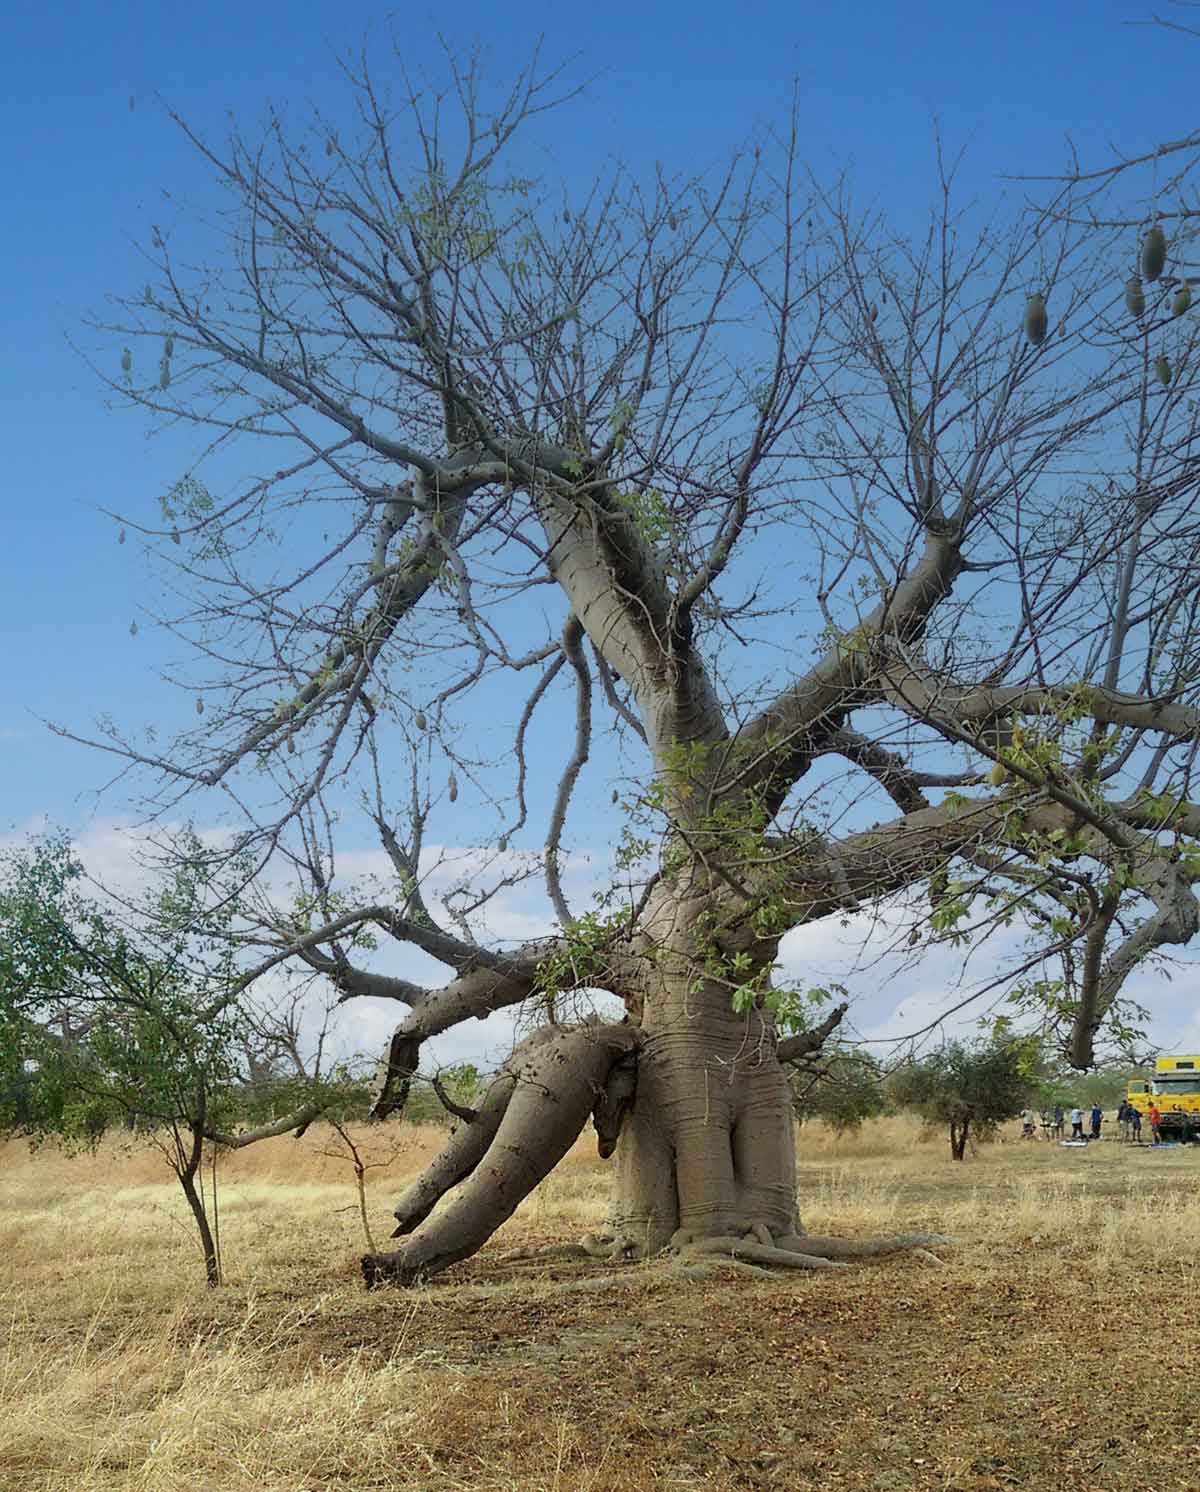 A Baobab tree that looks like an art installation to me.